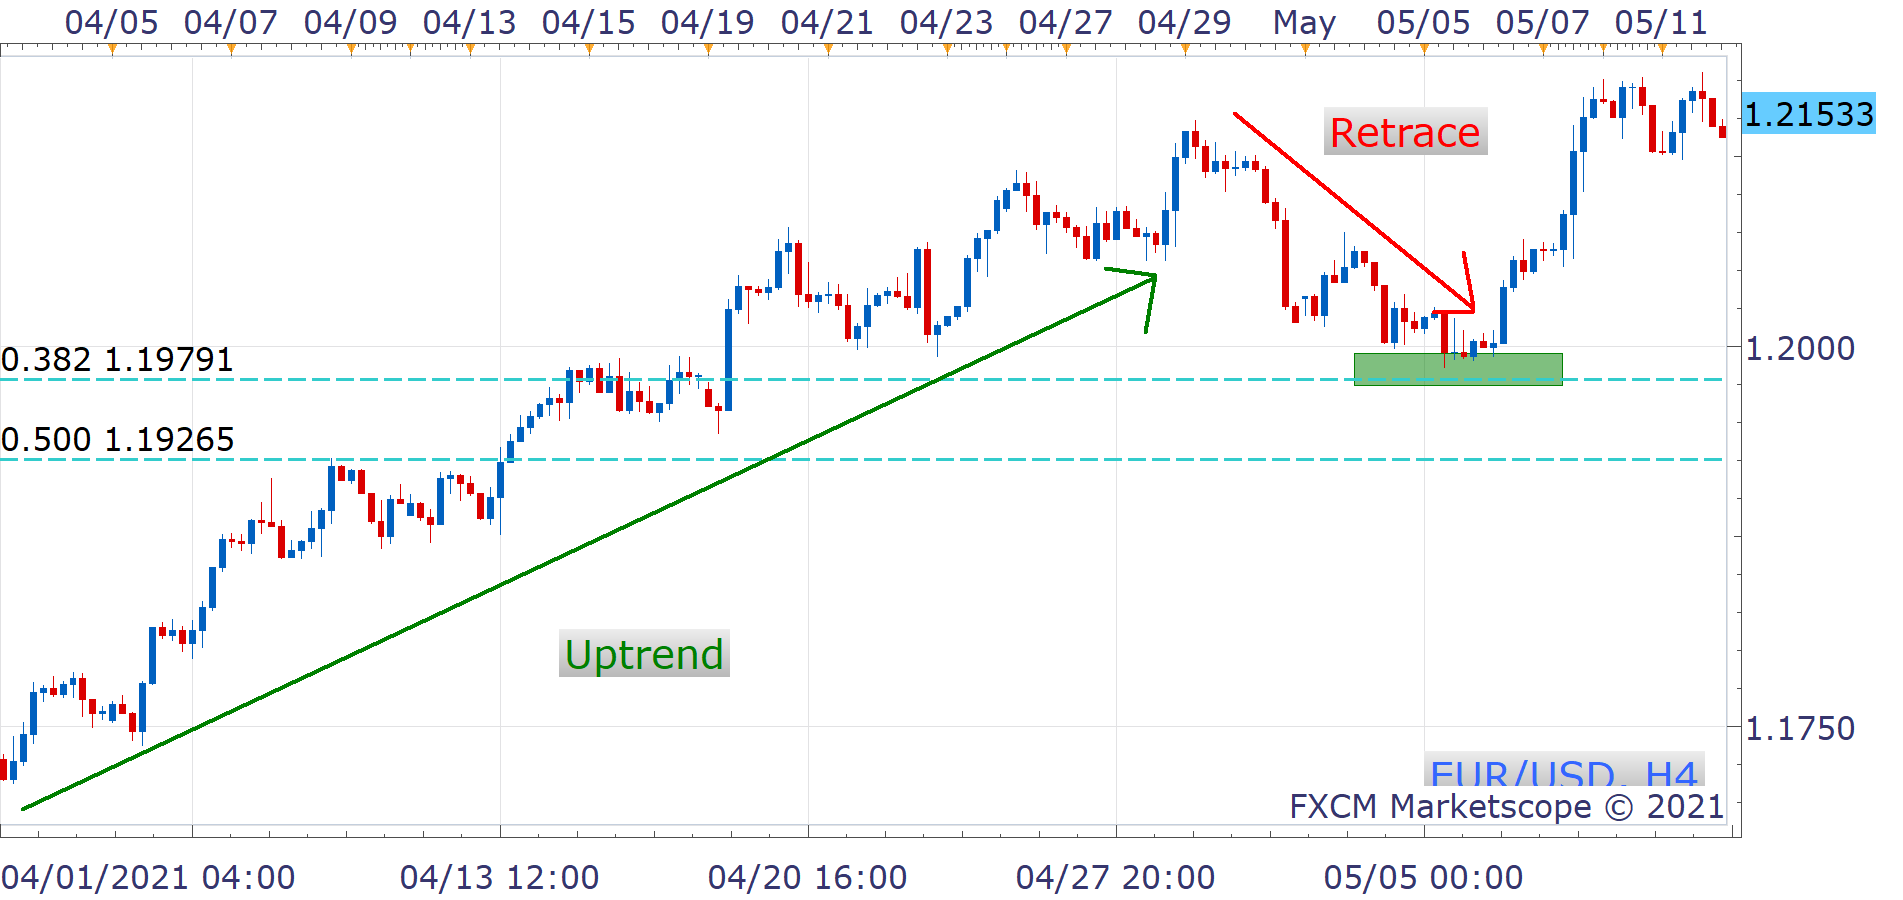 12 Of The Best Forex Trading Strategies - FXCM Markets